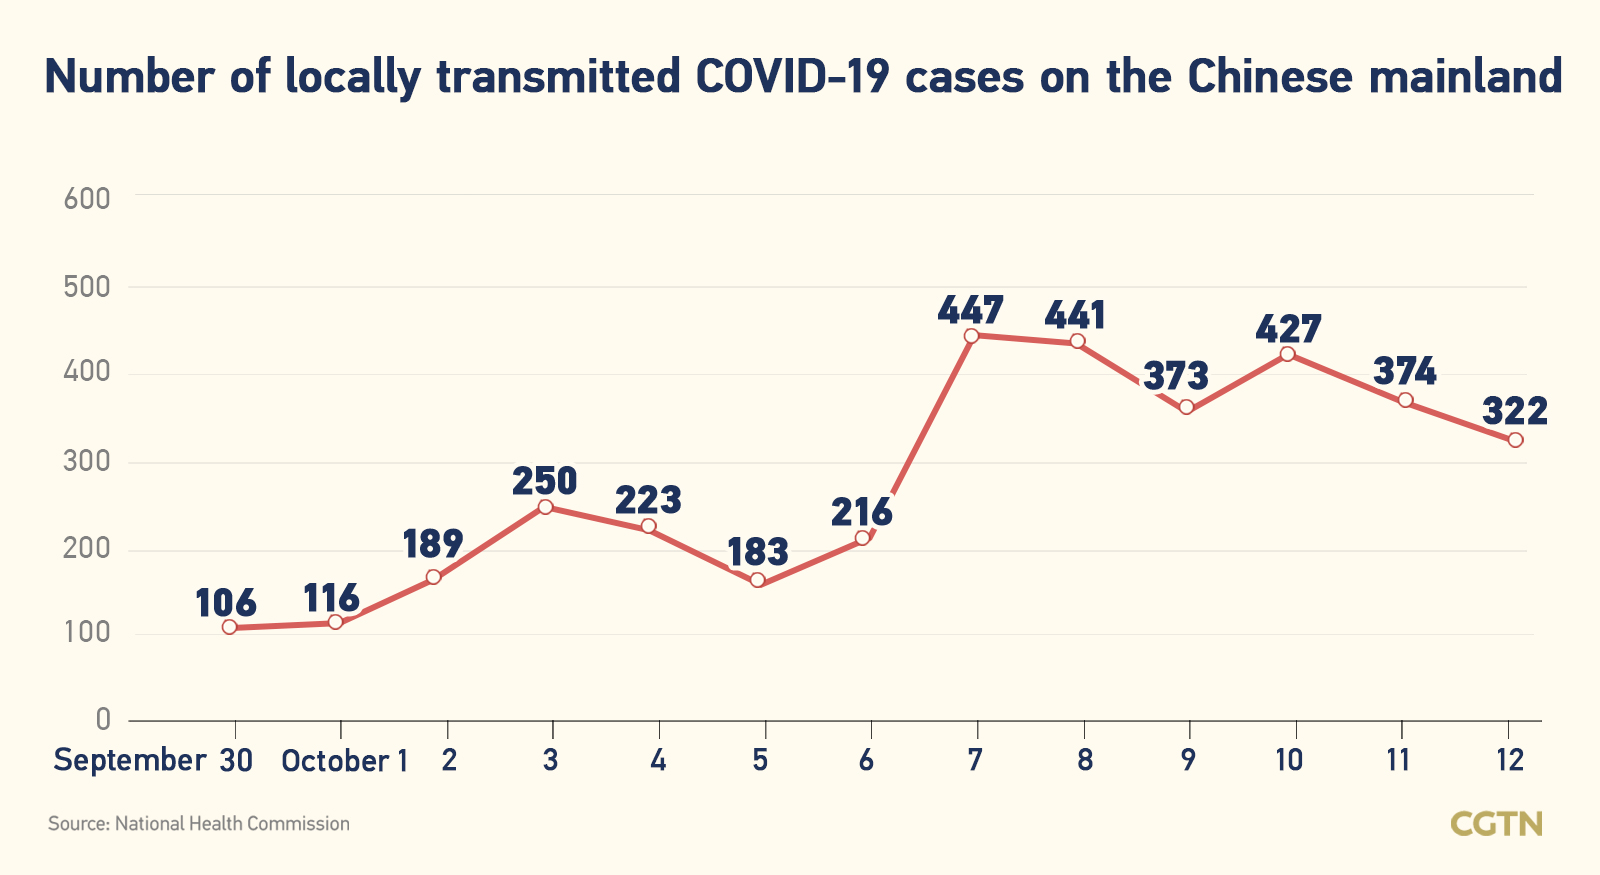 Chinese mainland records 372 new confirmed COVID-19 cases